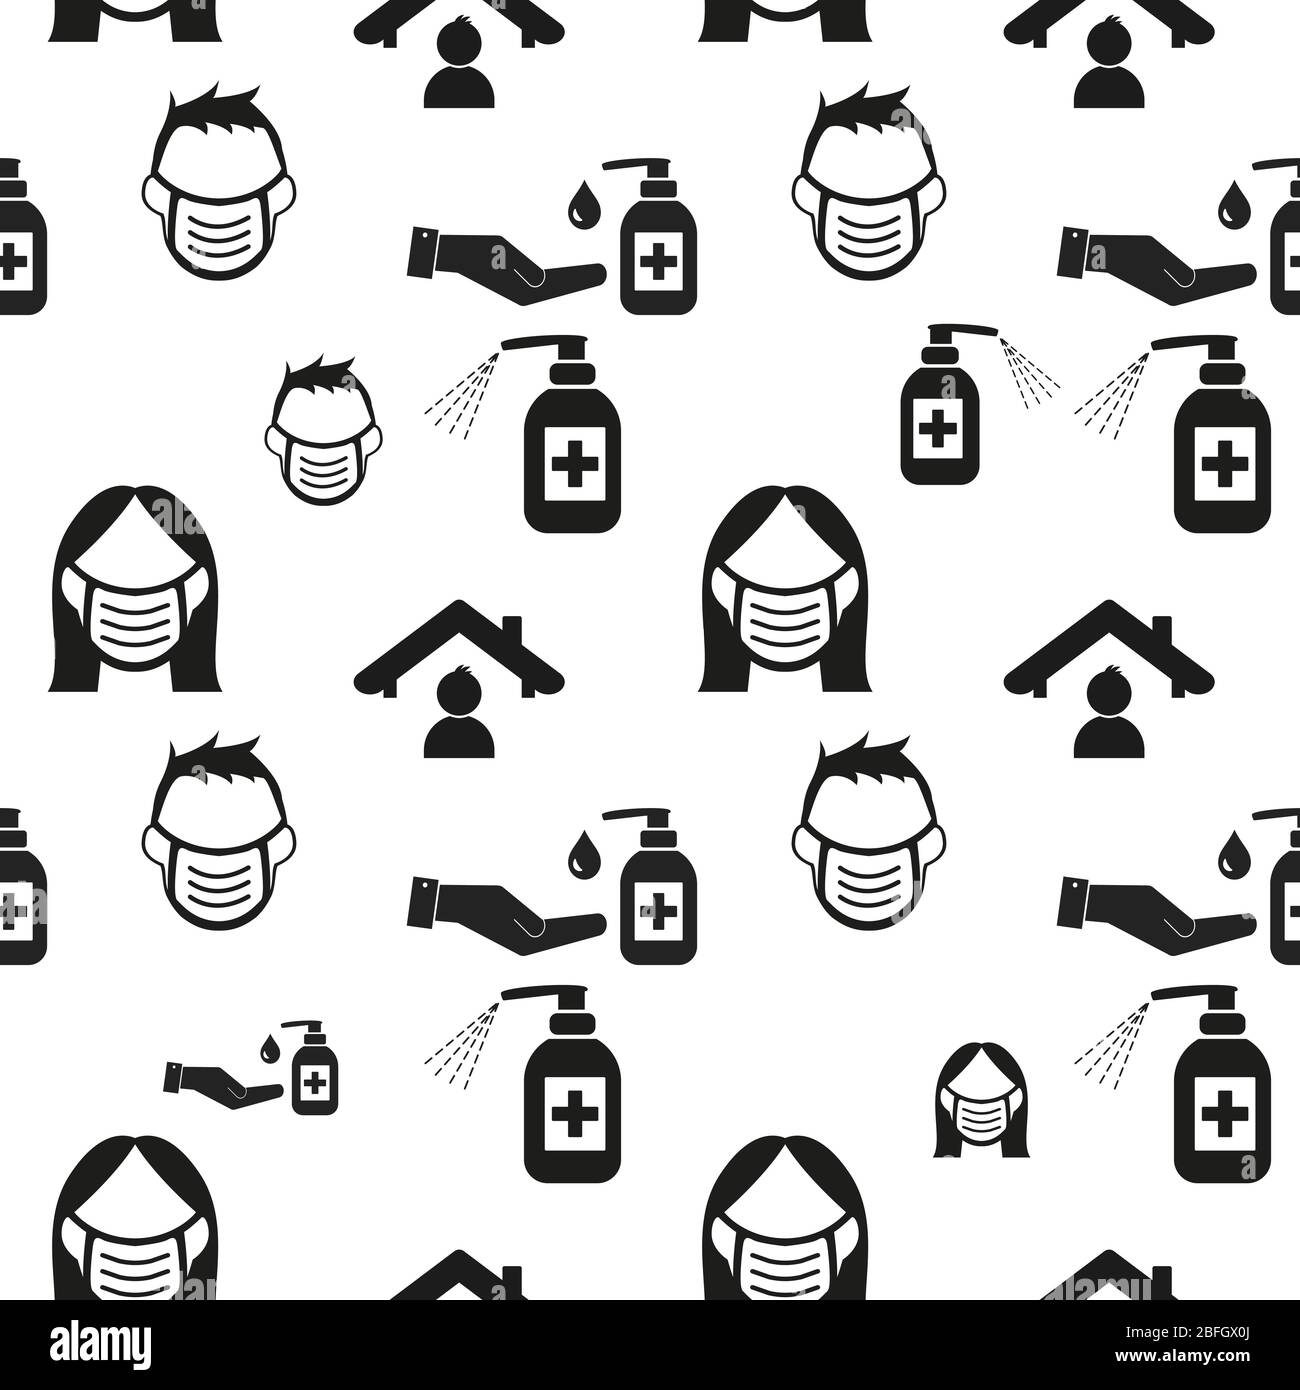 staying at home with self quarantine to help slow outbreak and protect virus spread. seamless repeating pattern background, illustration virus Stock Vector